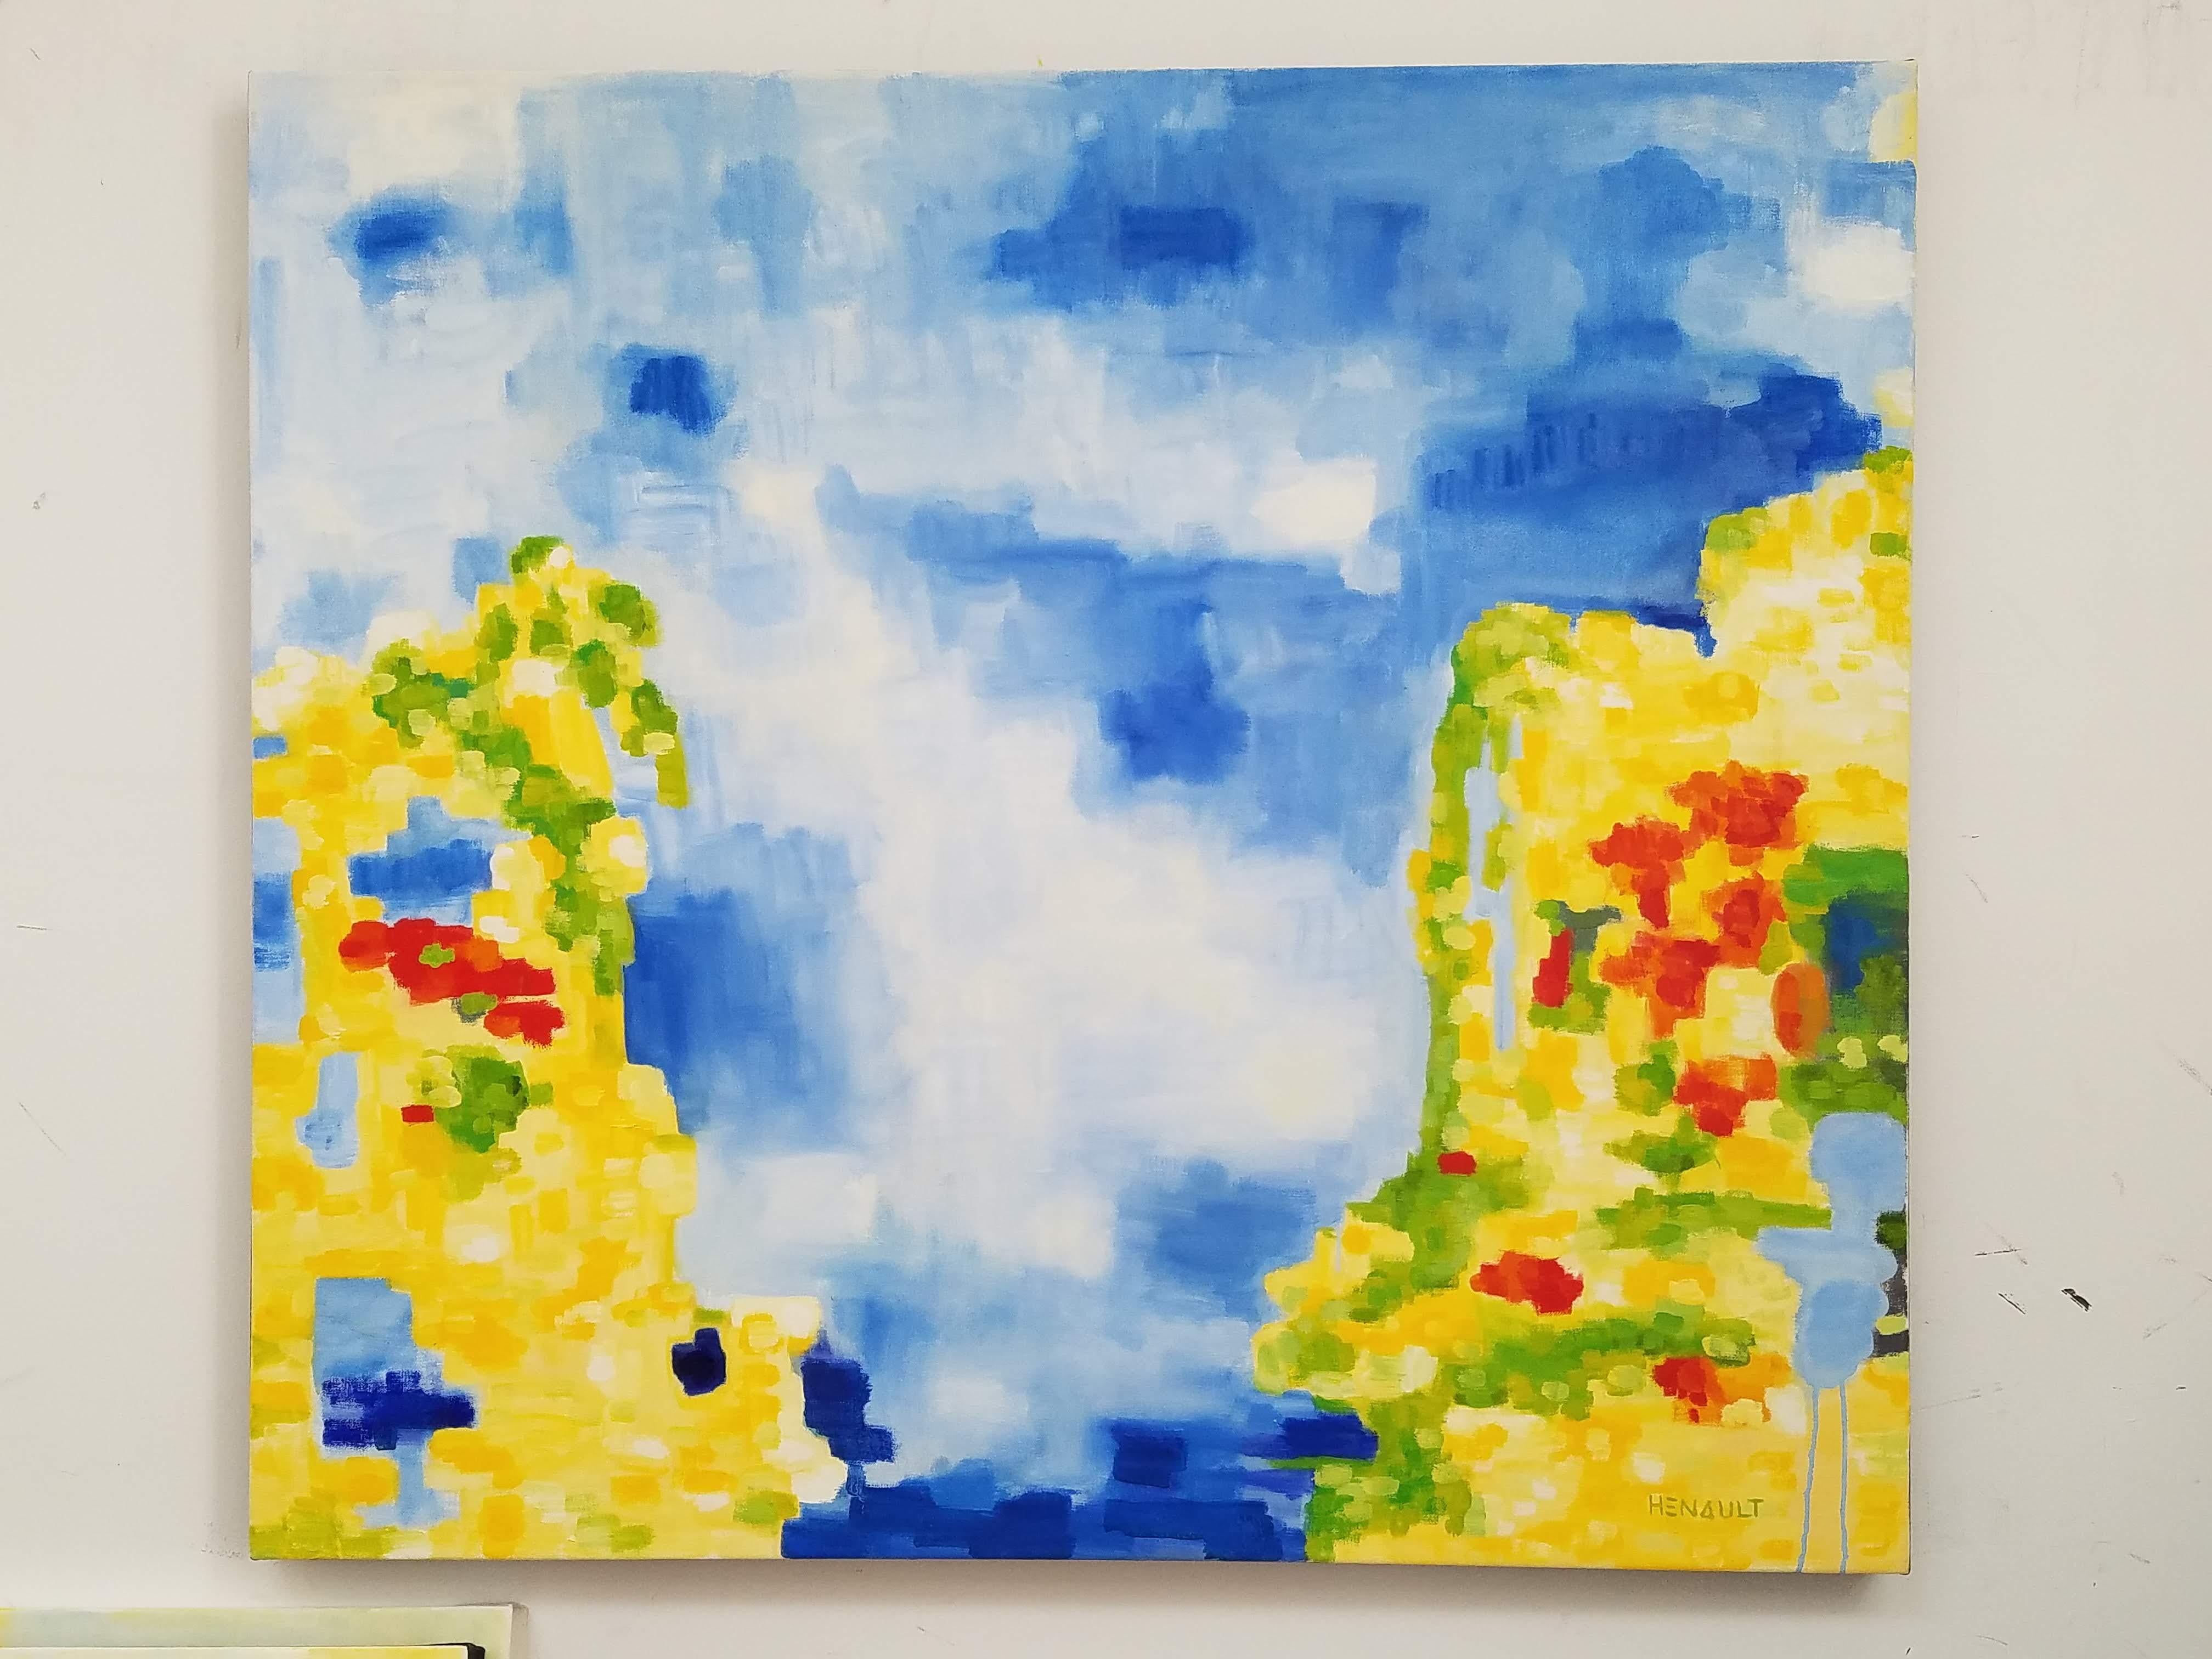 Modern abstract, oil on canvas painting, titled “Malte/Malta” by Michelle Hénault, a conceptual fine artist. Signed on front bottom right, also, signed, dated and titled on back; measuring approximate 36